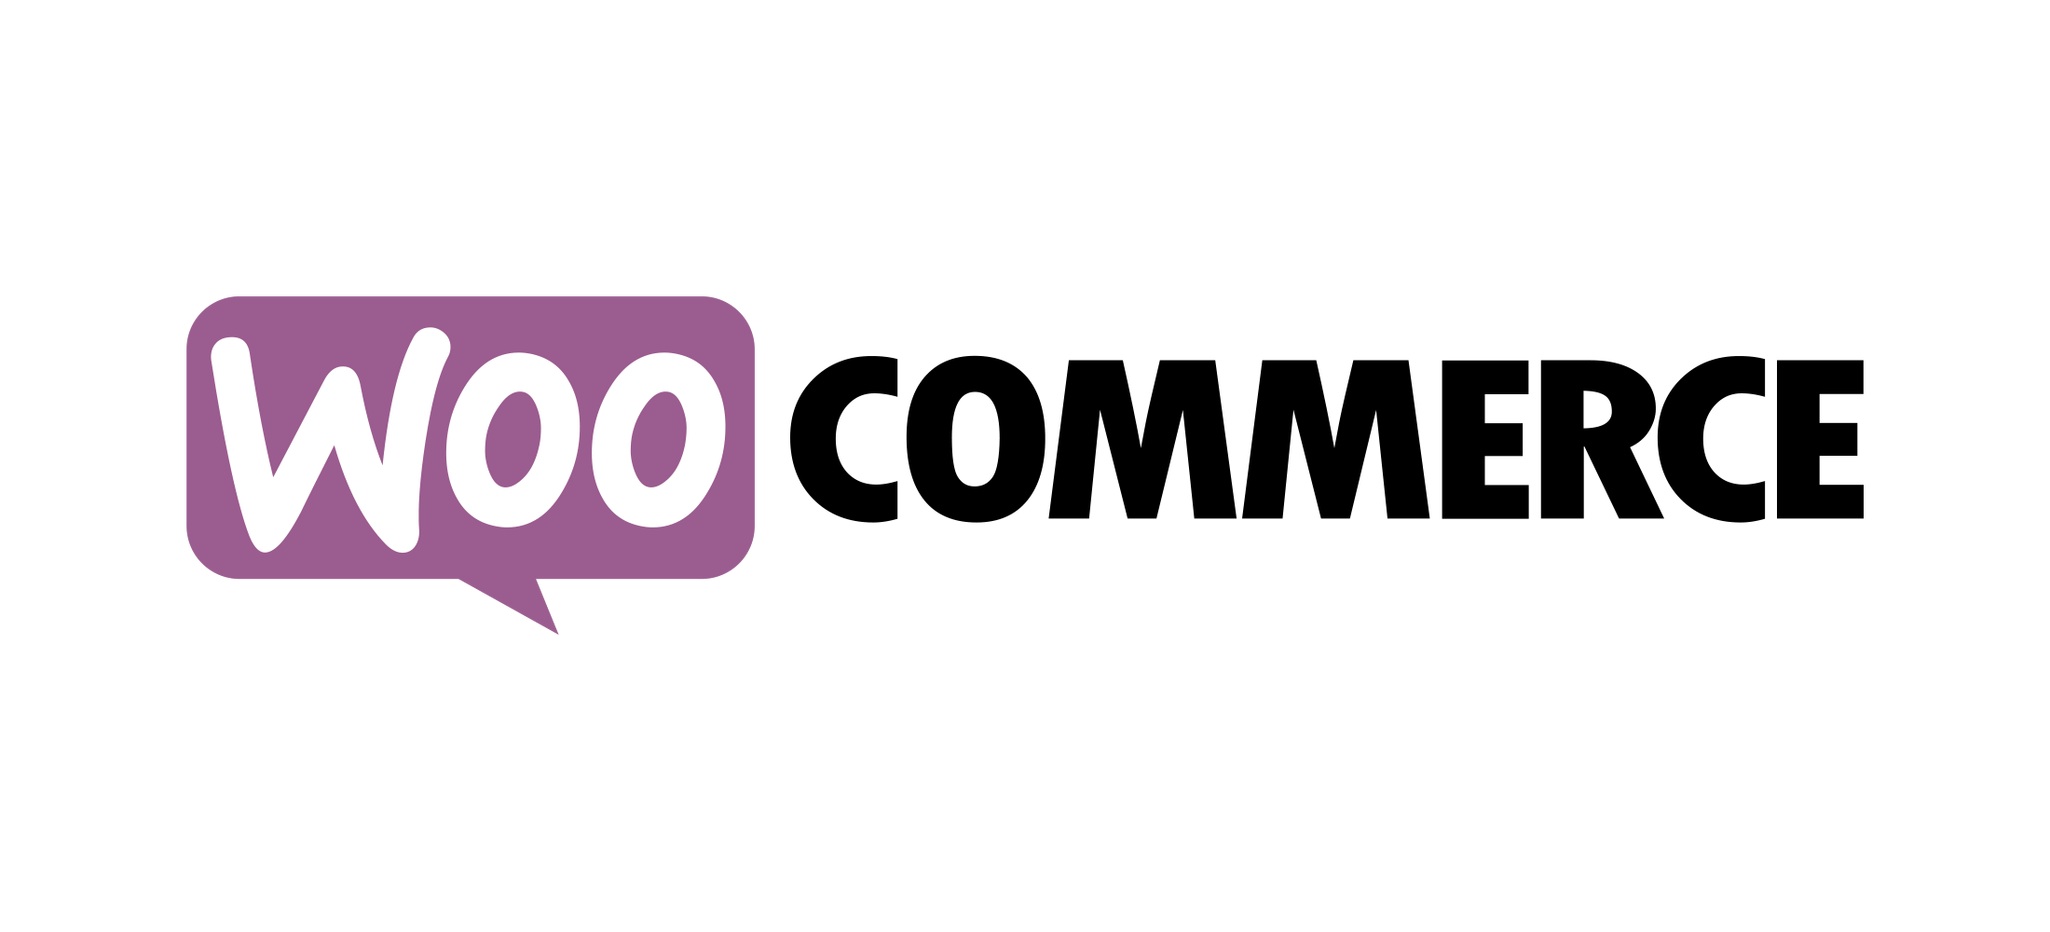 WooCommerce 3.6 Released with New Product Blocks and Major Performance Improvements